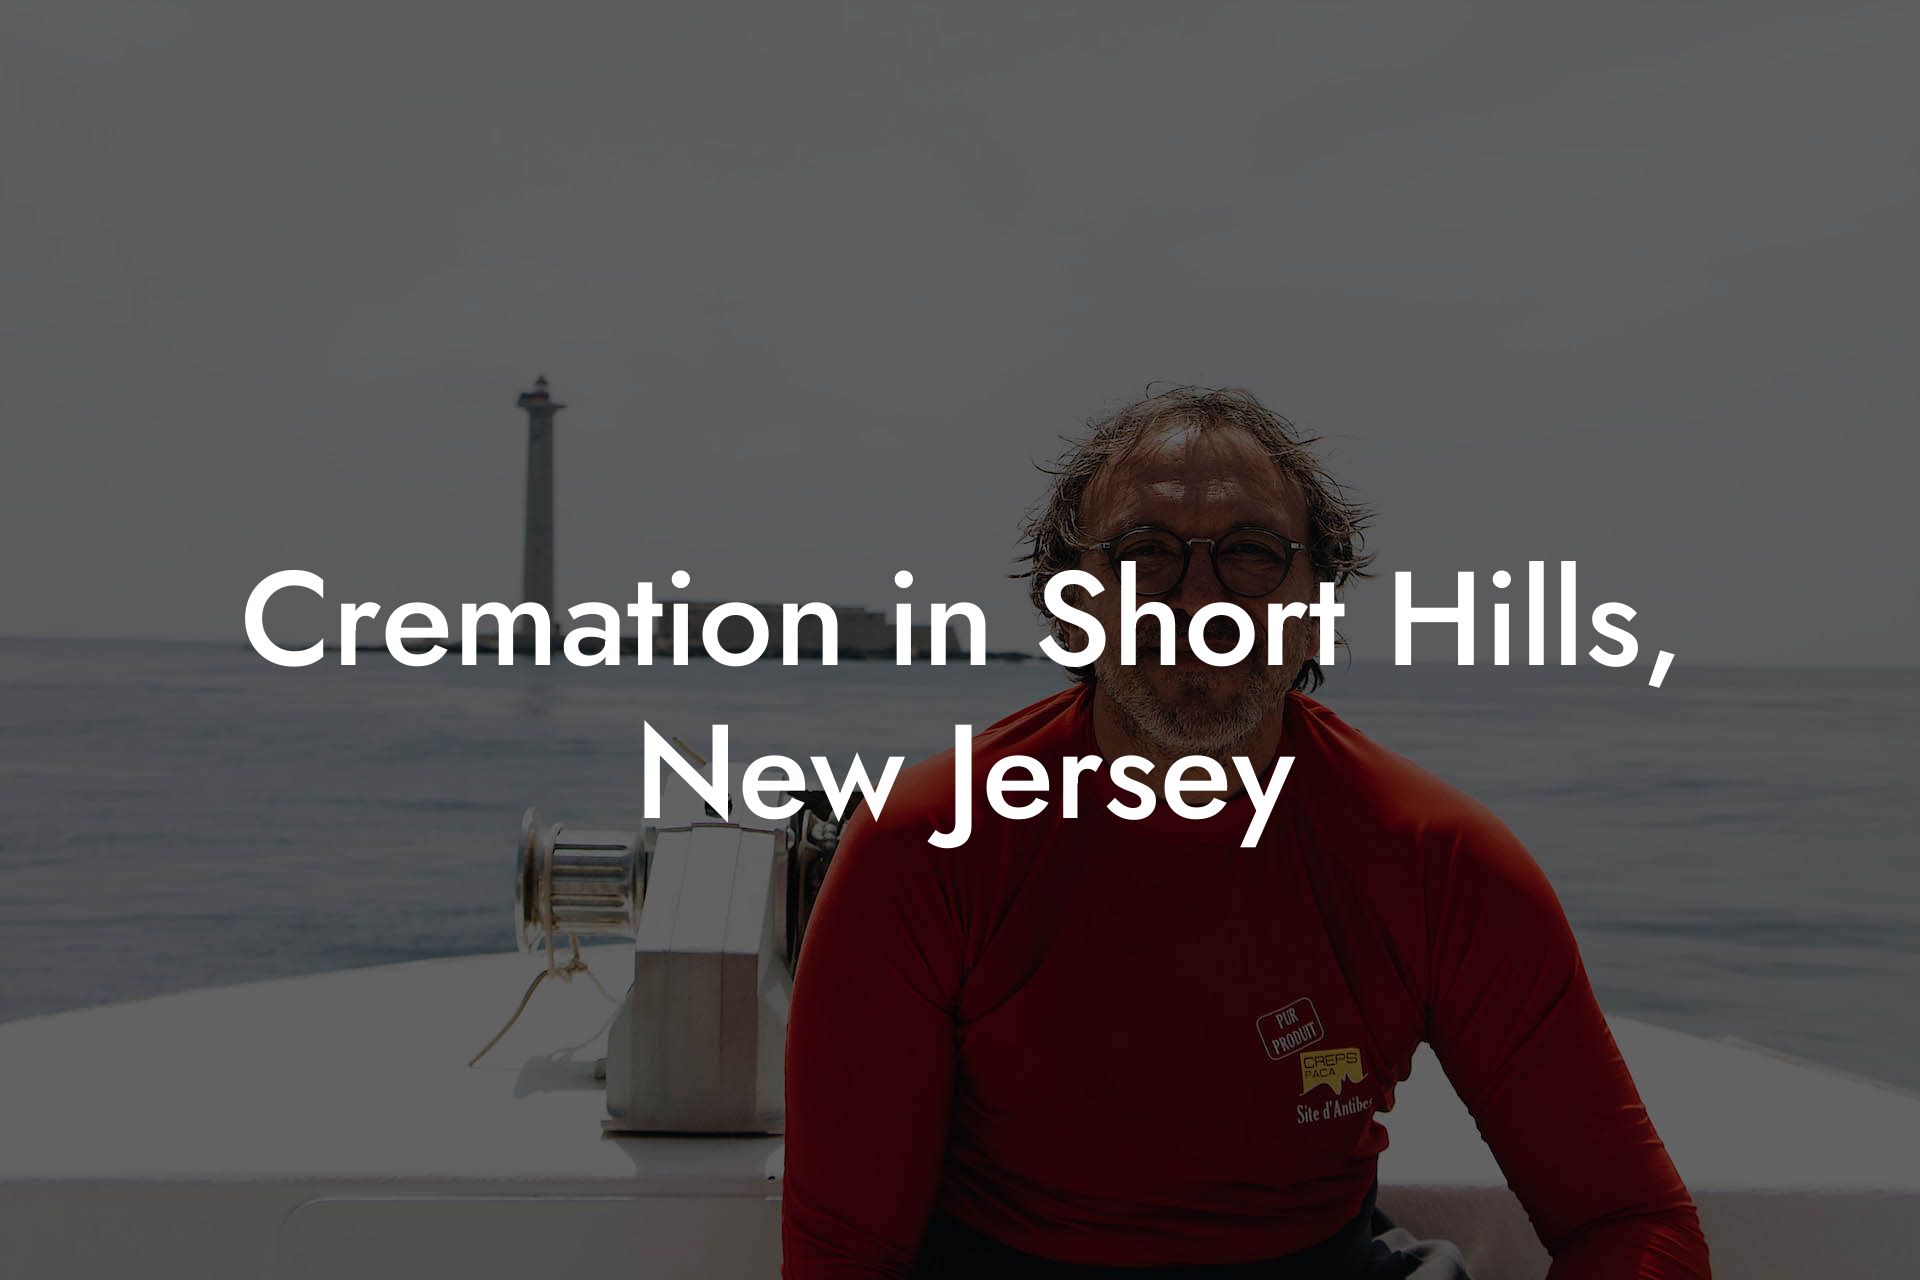 Cremation in Short Hills, New Jersey